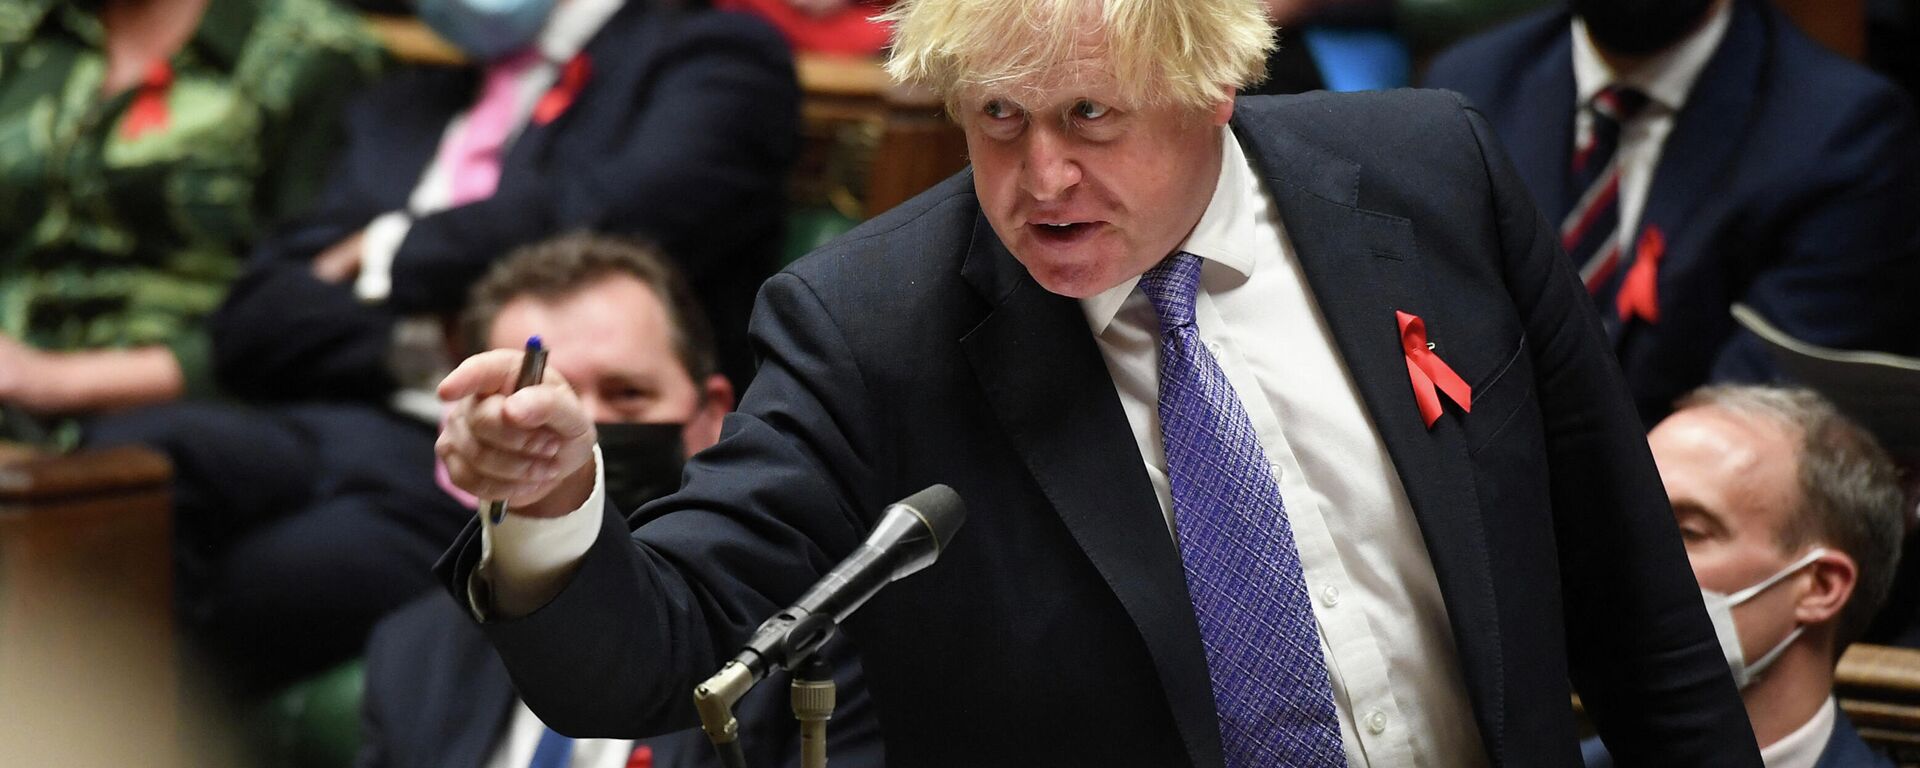 A handout photograph released by the UK Parliament shows Britain's Prime Minister Boris Johnson gesturing as he speaks during Prime Minister's Questions (PMQs) in the House of Commons in London on December 1, 2021 - Sputnik International, 1920, 12.01.2022